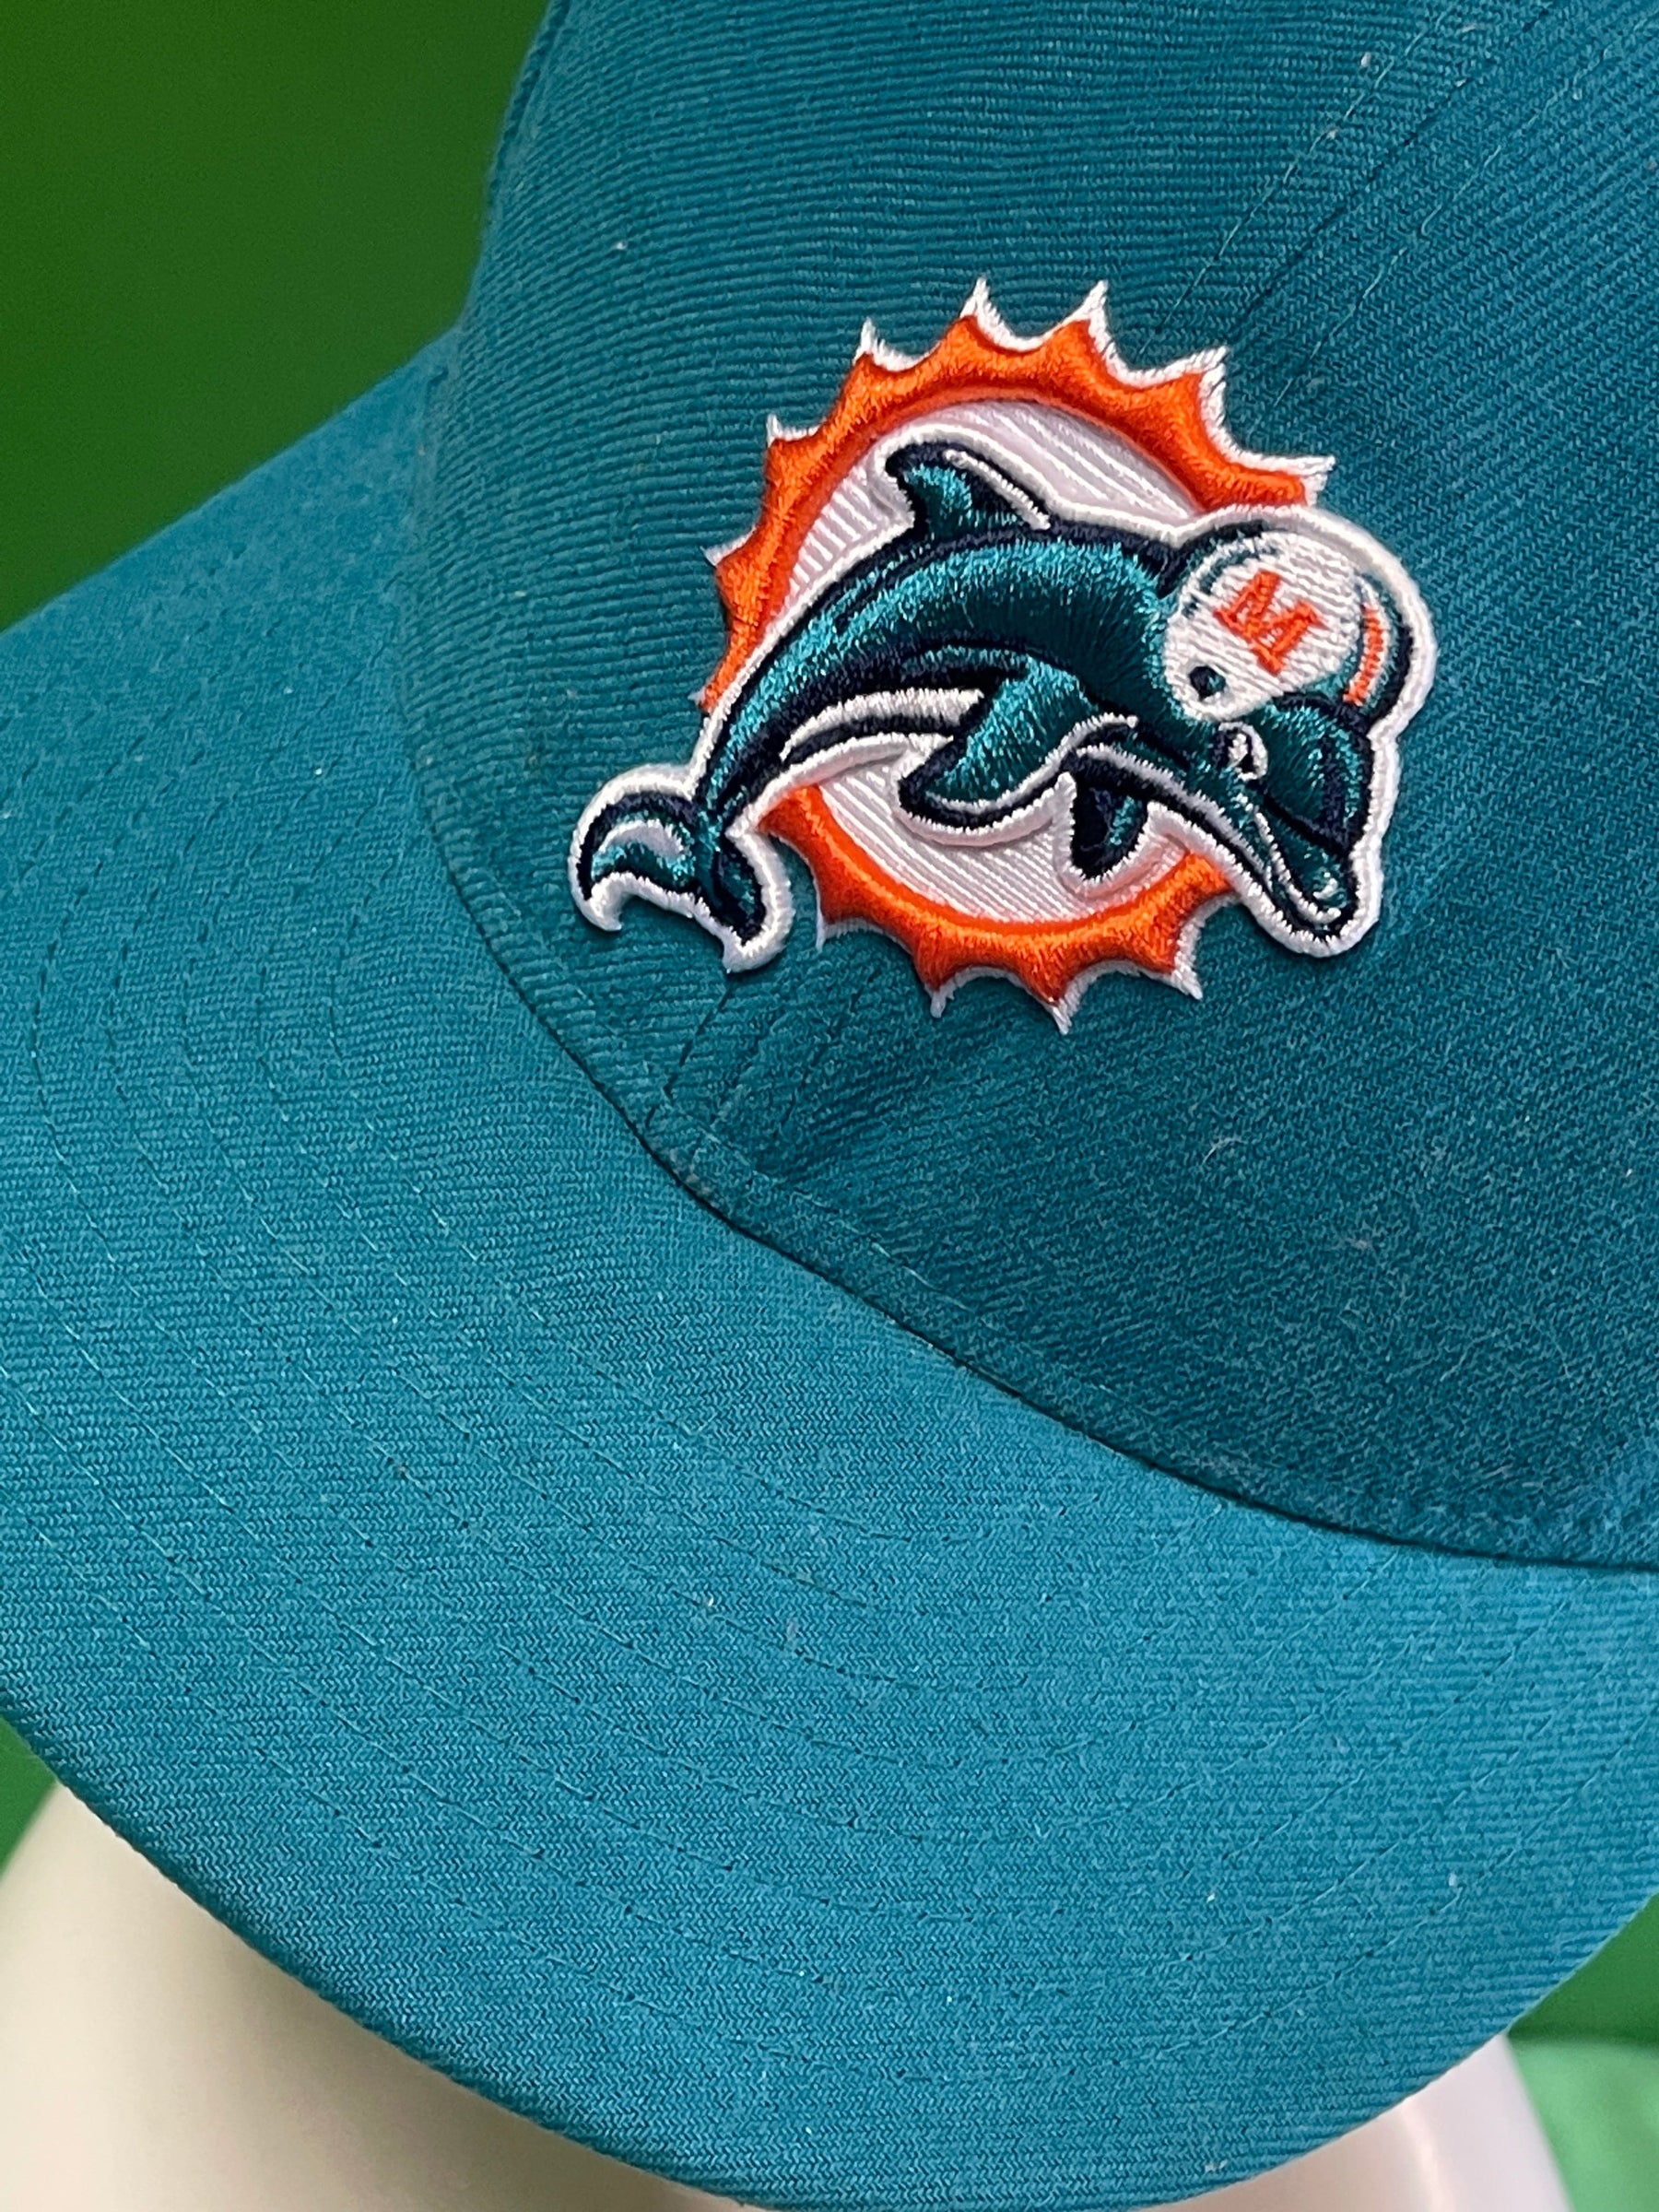 NFL Miami Dolphins New Era 59Fifty Fitted Hat/Cap Size 7-3/8